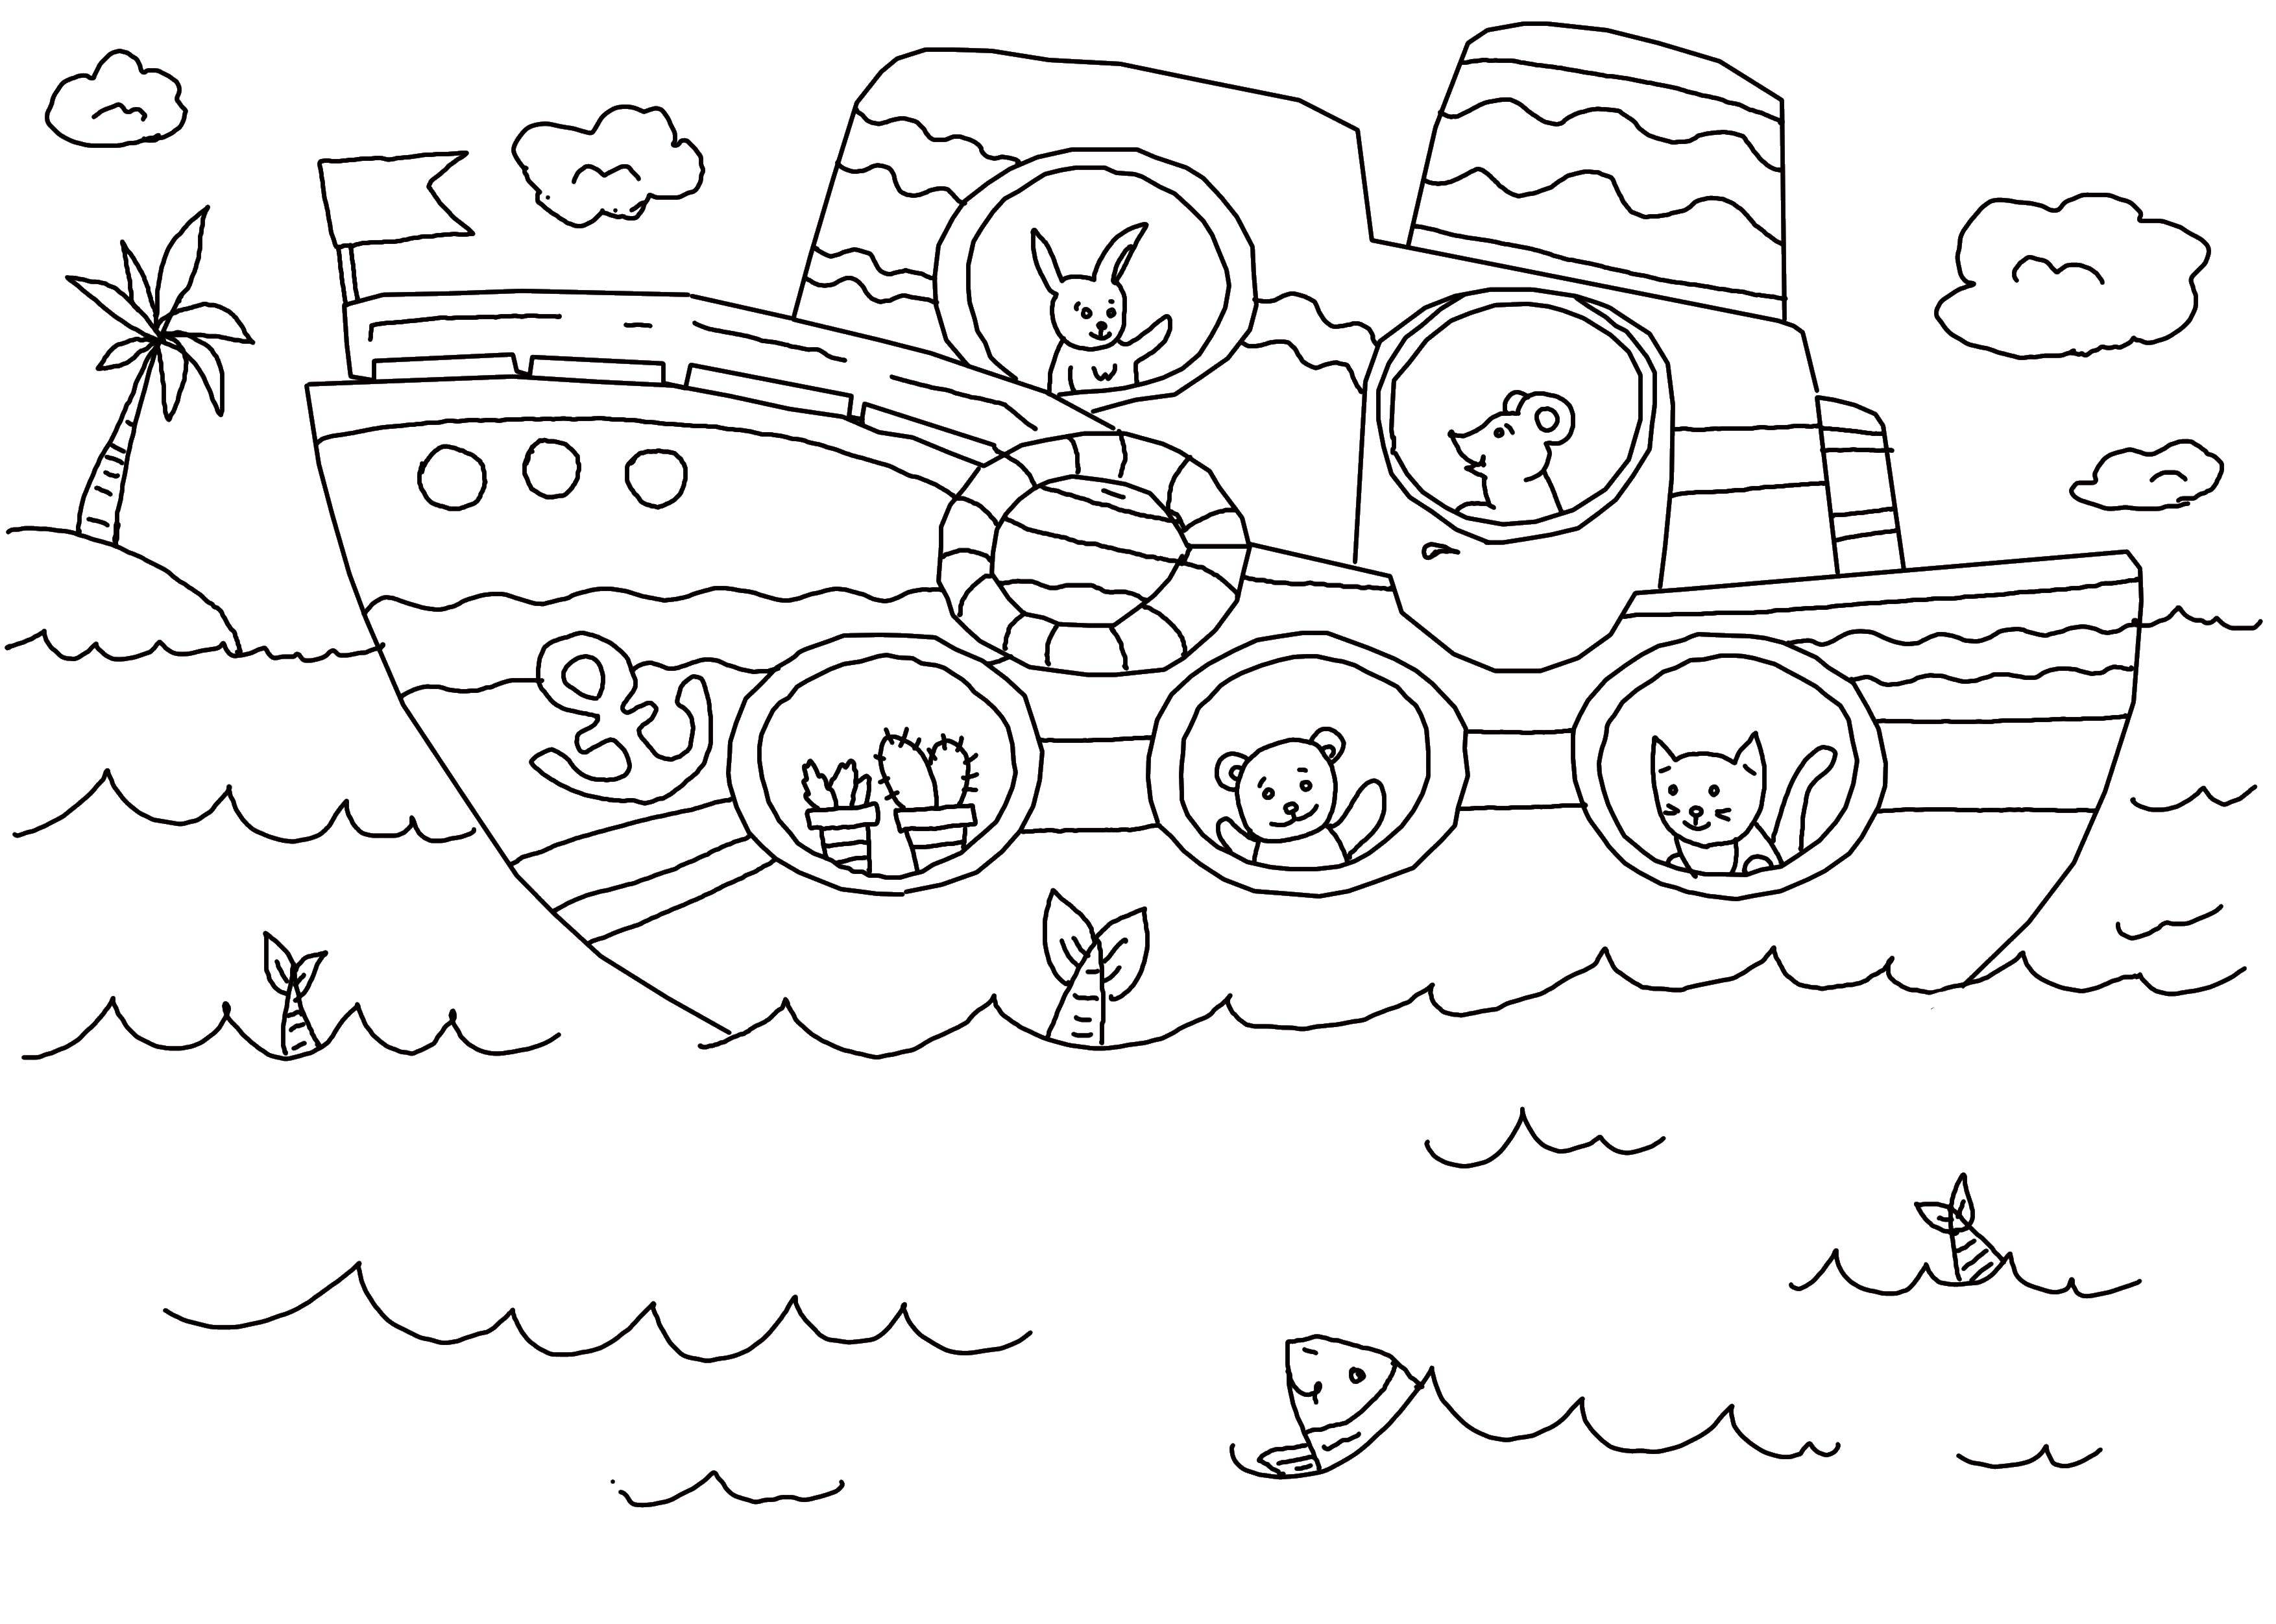 Coloring Ship with animals. Category ship. Tags:  ship, sea.